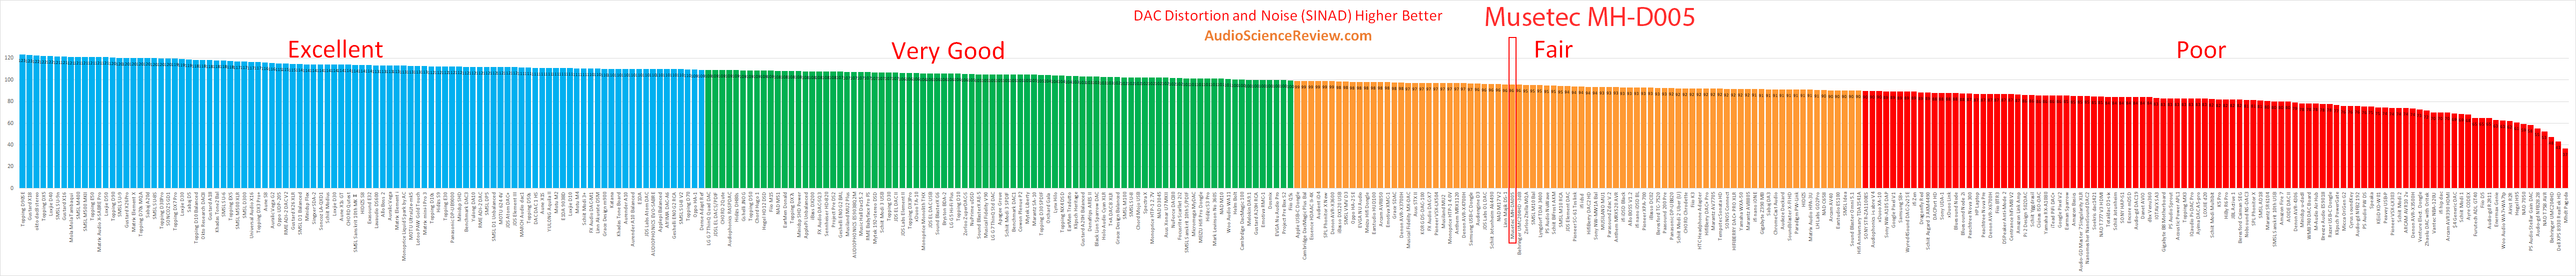 Best stereo high-end dac review 2022.png